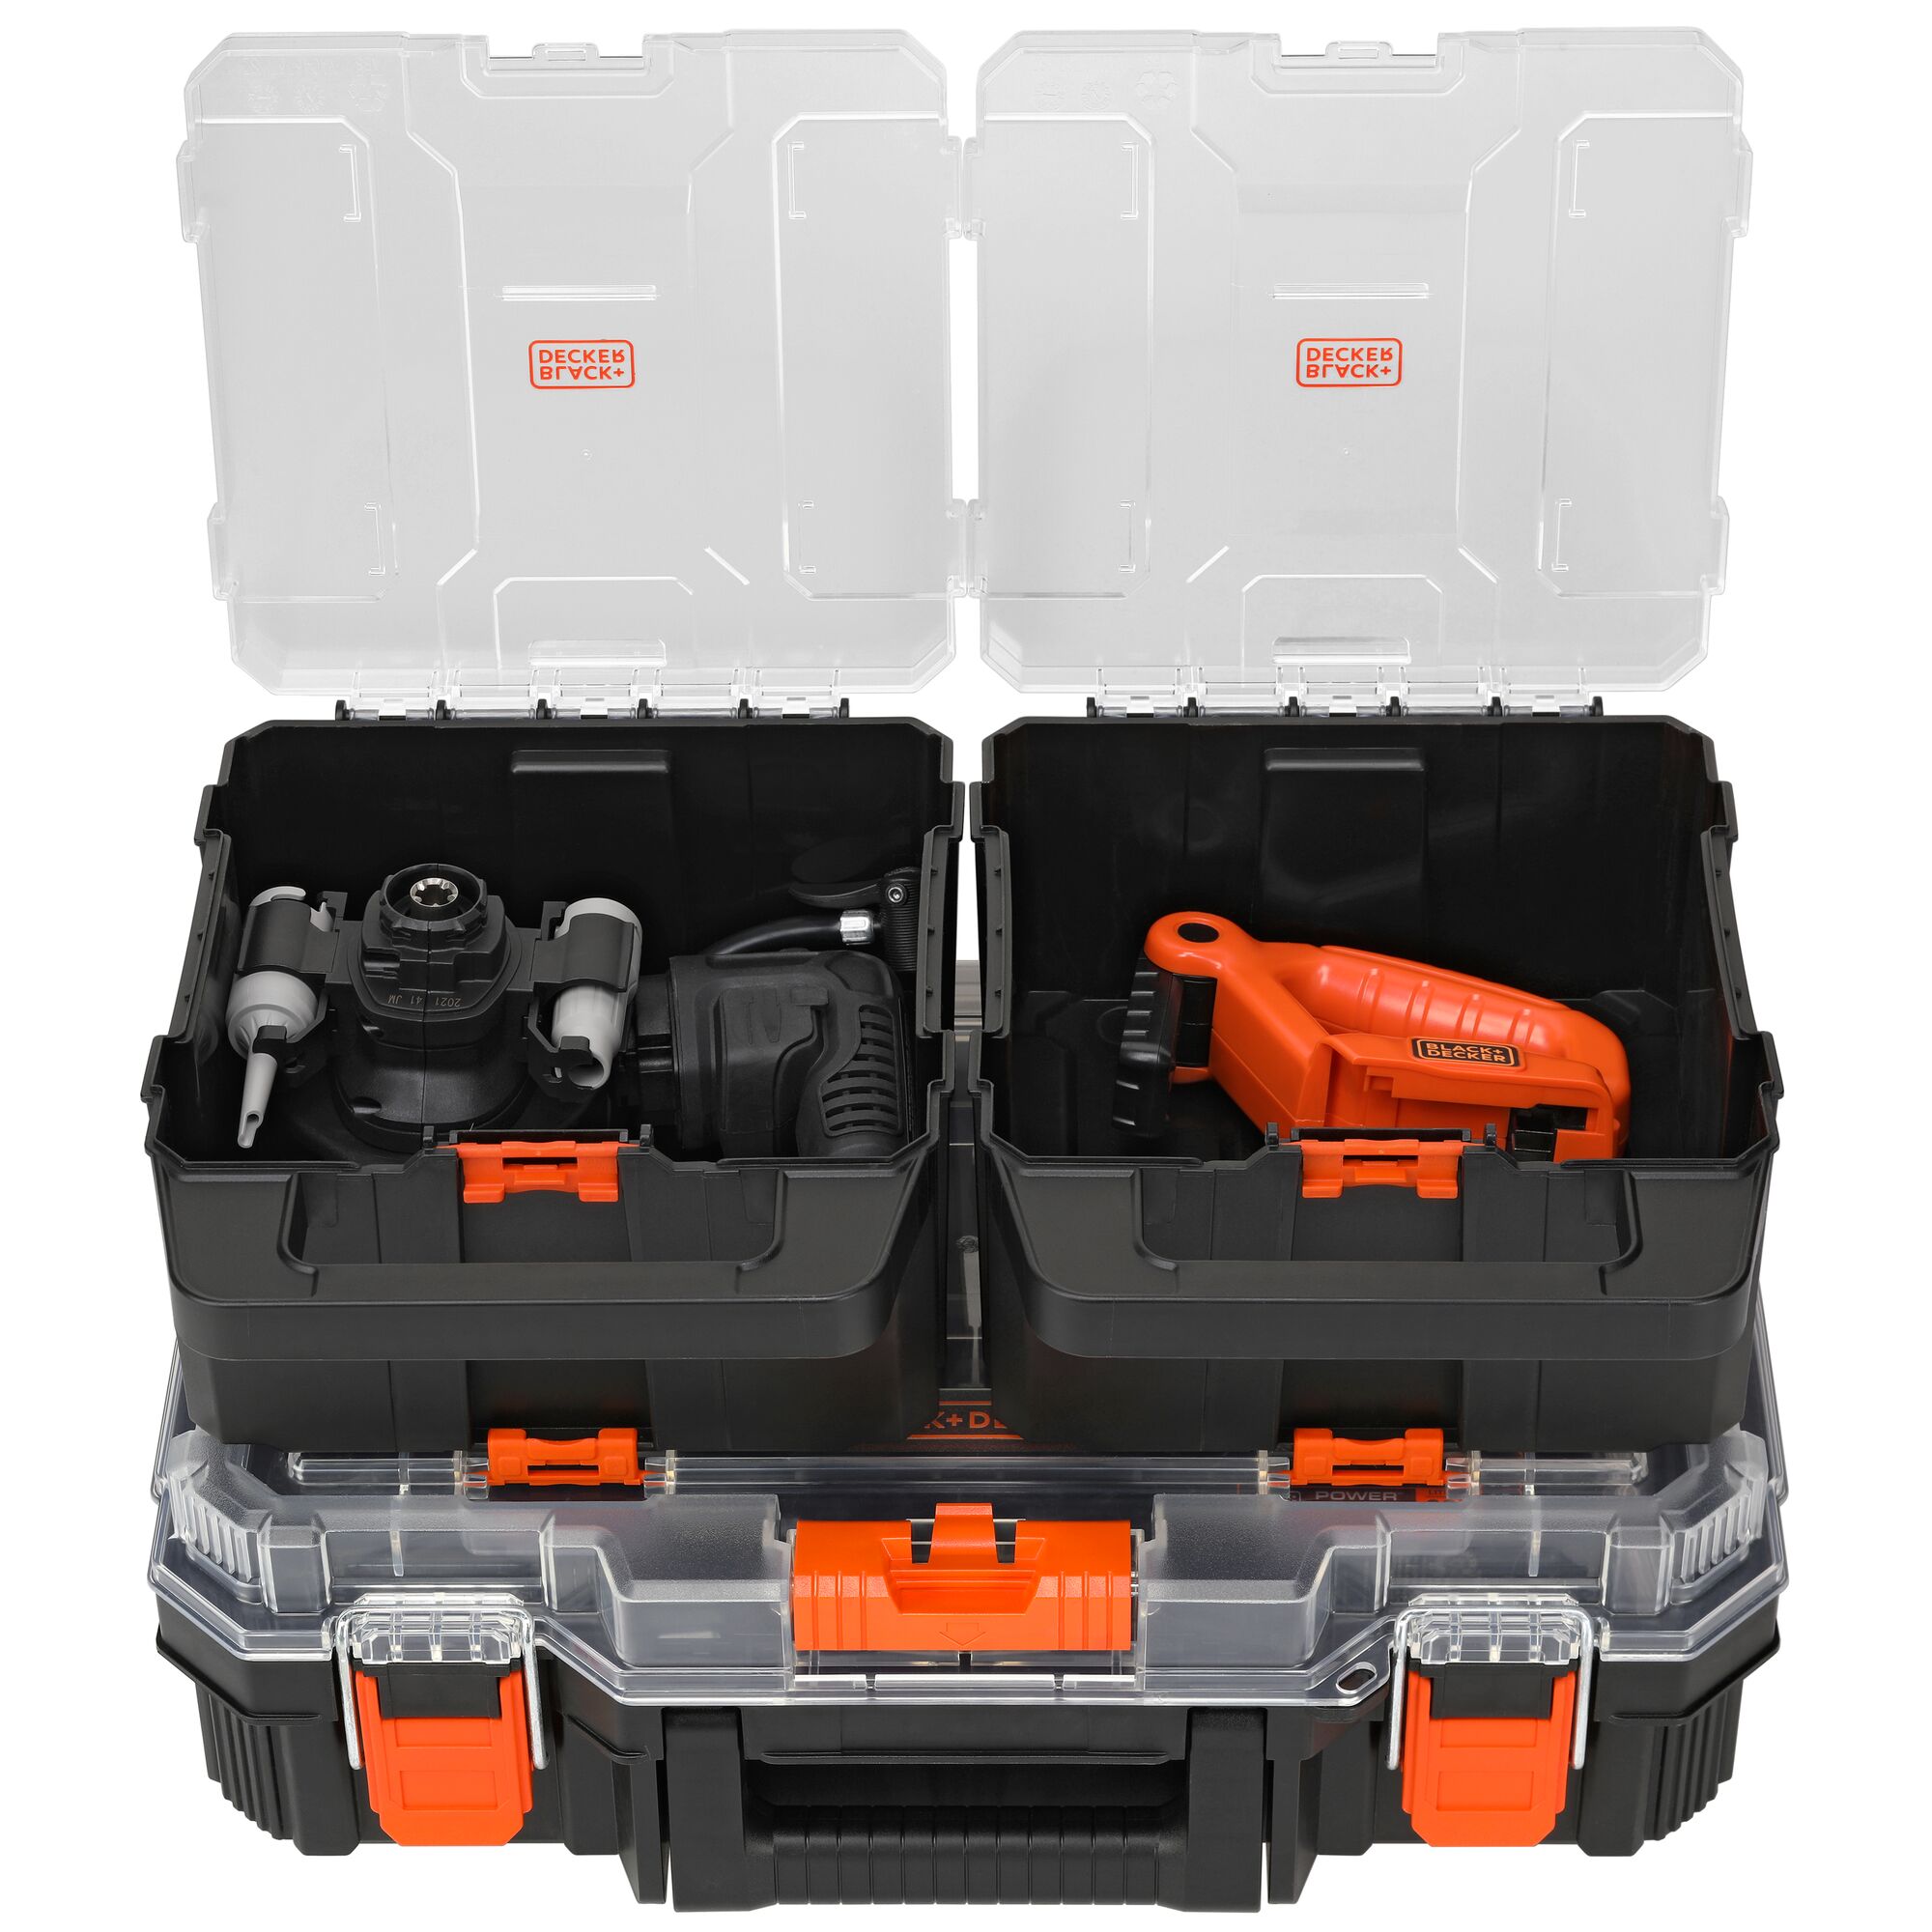 Black+Decker Kids Tools All-in-One Mega Case with Matrix Drill, Jigsaw and  Sander 25 Pieces Play Tools for Kids - Yahoo Shopping